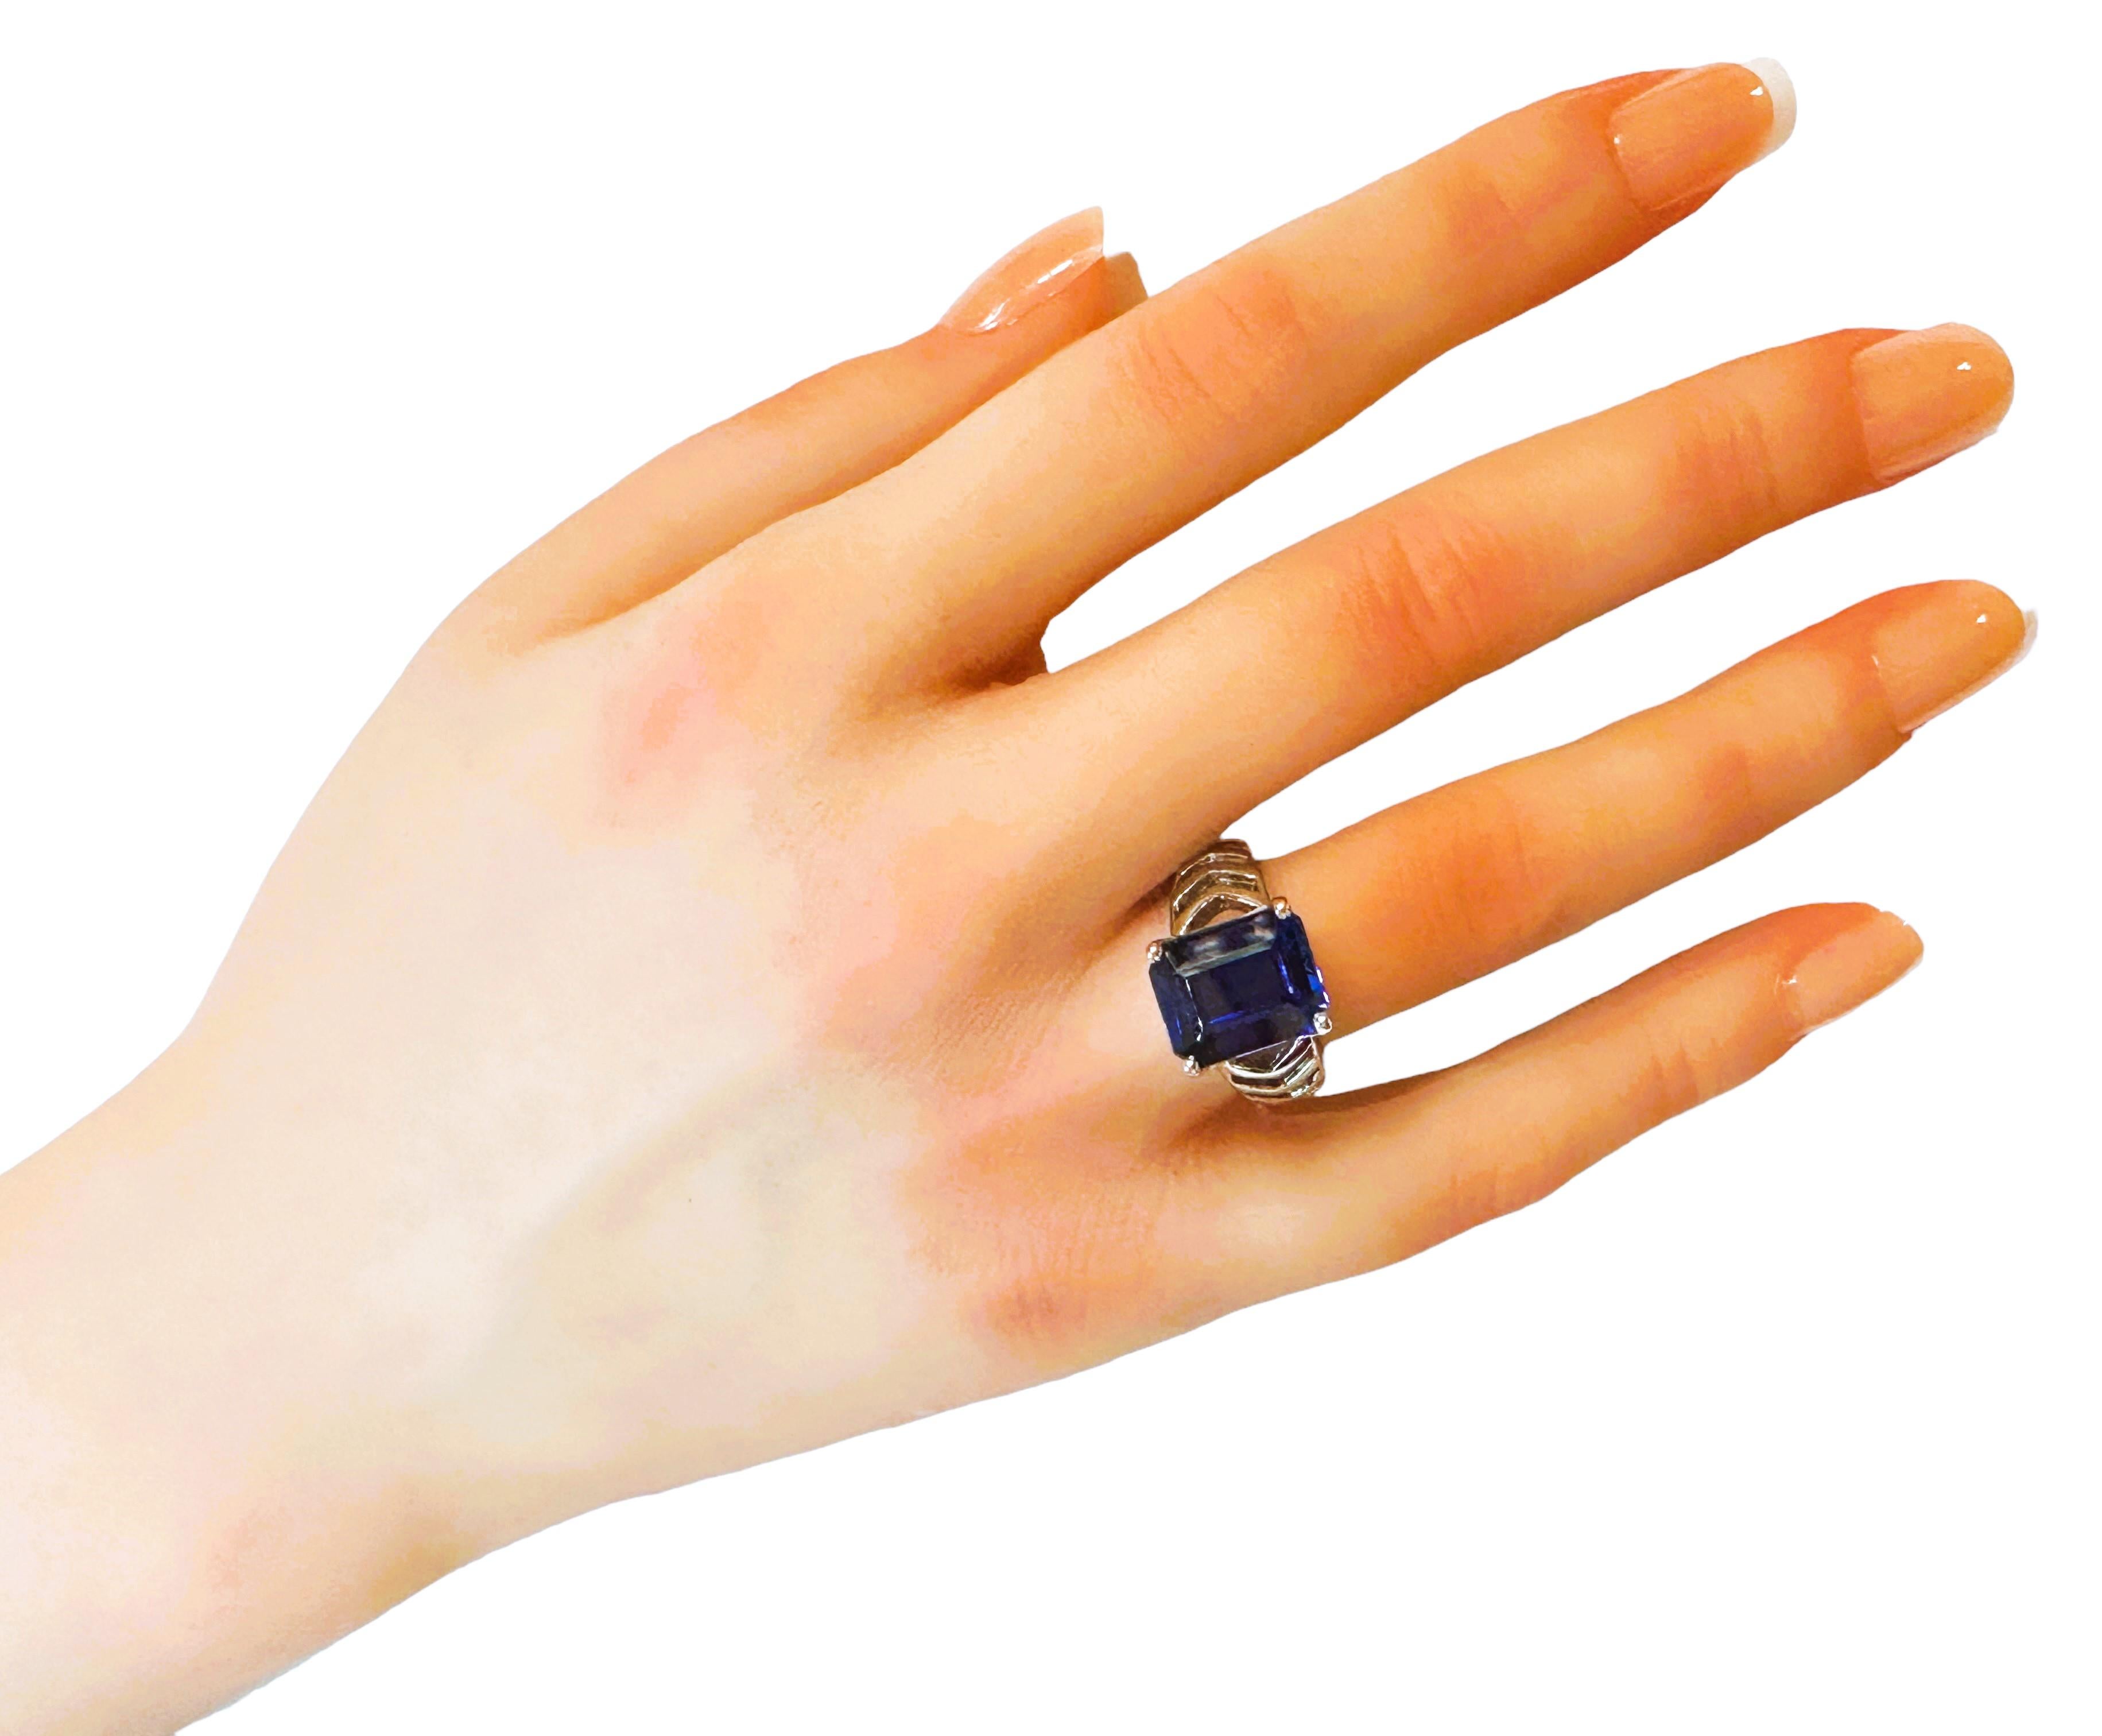 New Handmade African 8.30 Ct Royal Blue Sapphire Sterling Ring Size 7.25 For Sale 1